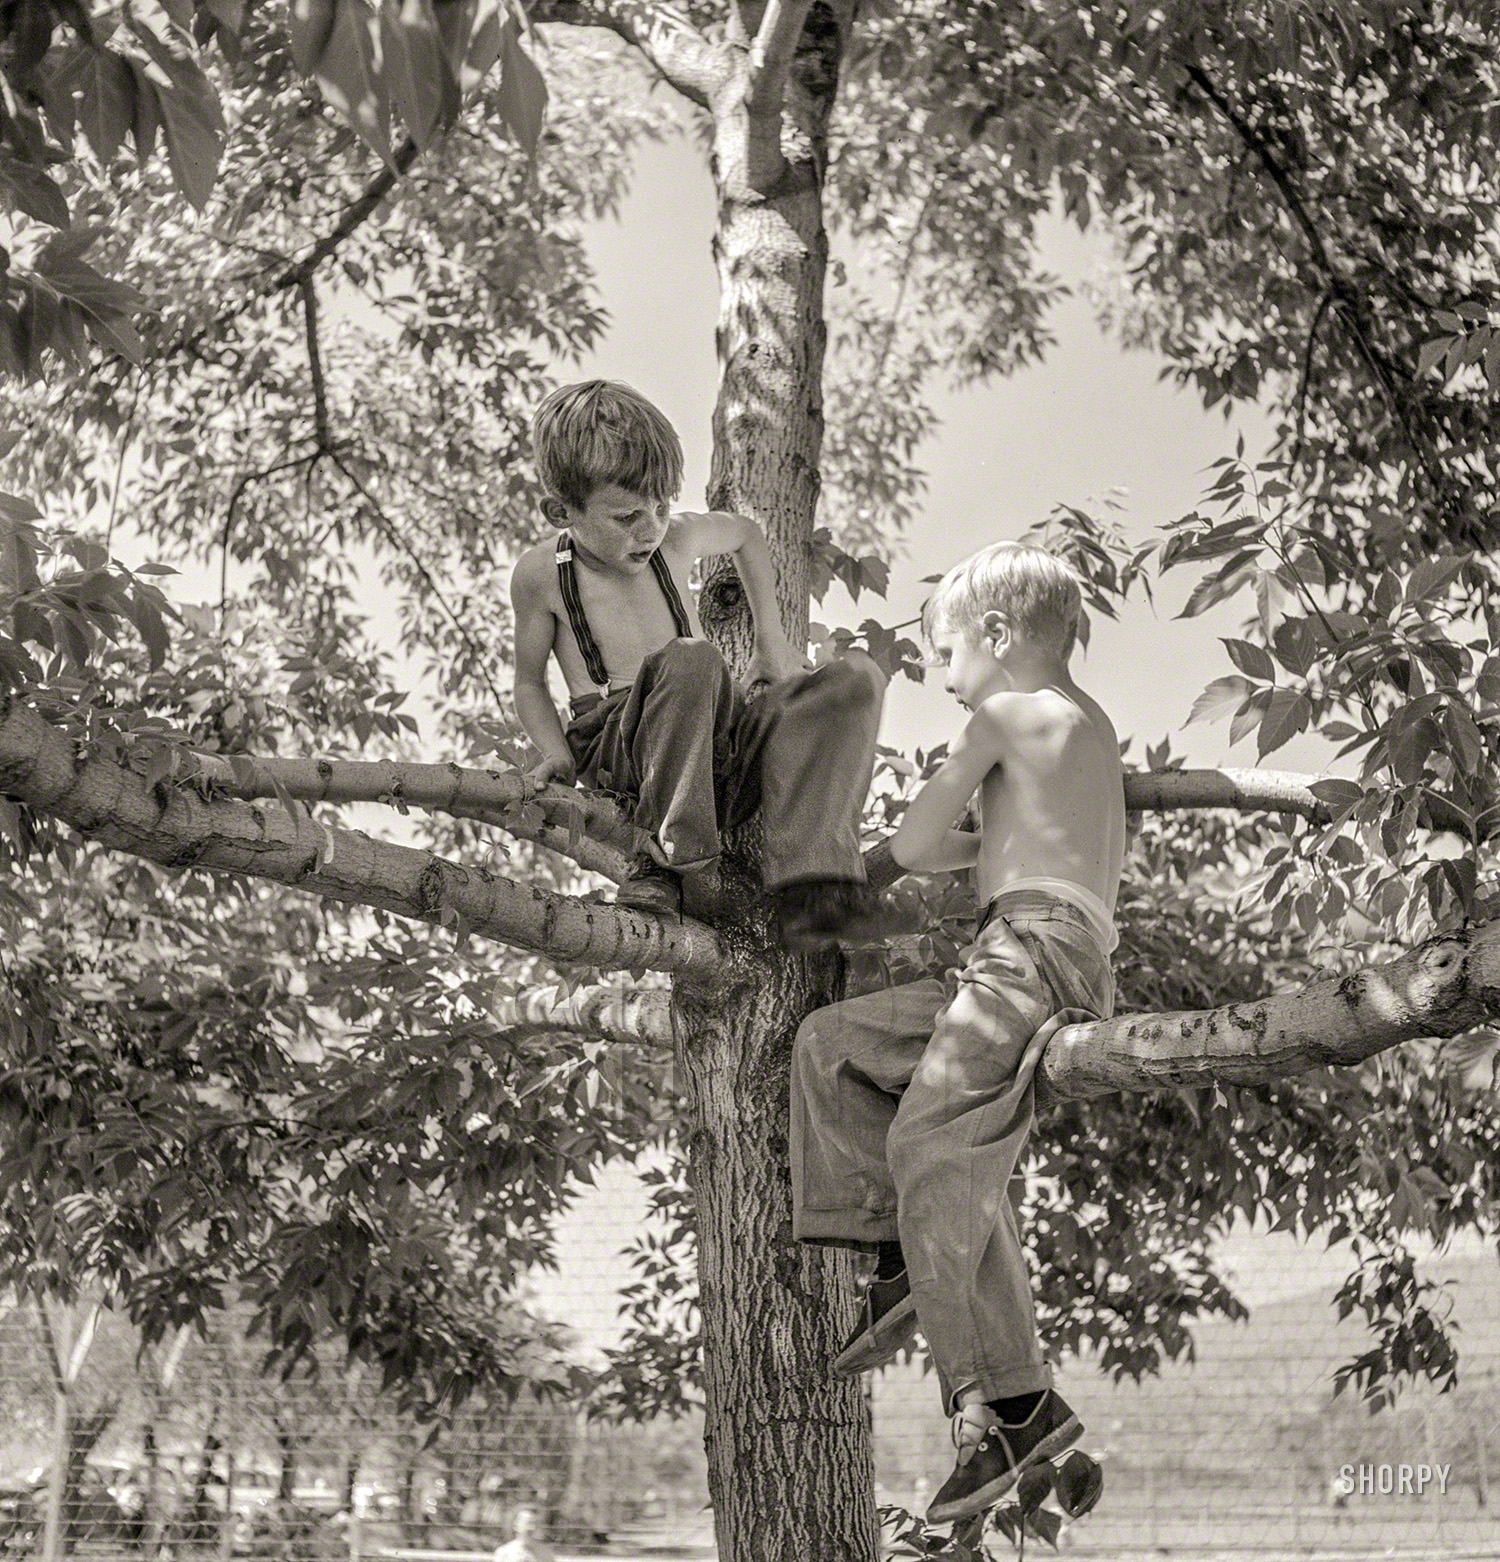 July 1942. Klamath Falls, Oregon. "Boys in city park on a Sunday afternoon." Photo by Russell Lee for the Office of War Information. View full size.